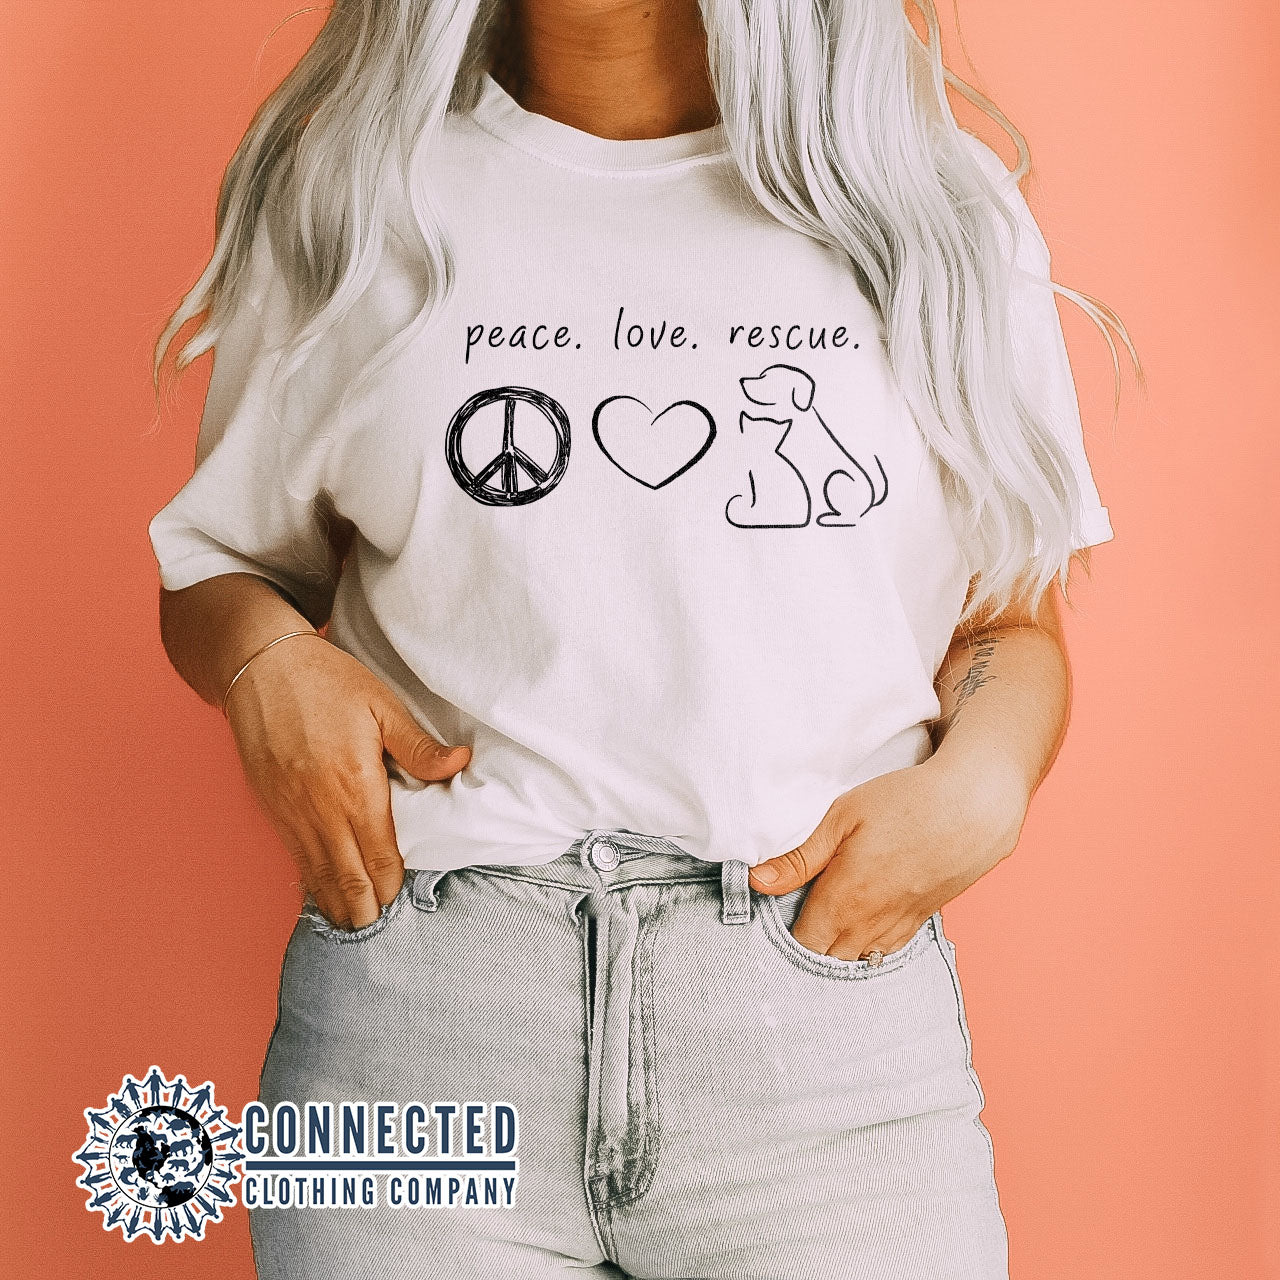 White Peace Love Rescue Short-Sleeve Tee - Connected Clothing Company - Ethically and Sustainably Made - 10% donated to Villalobos Animal Rescue Center